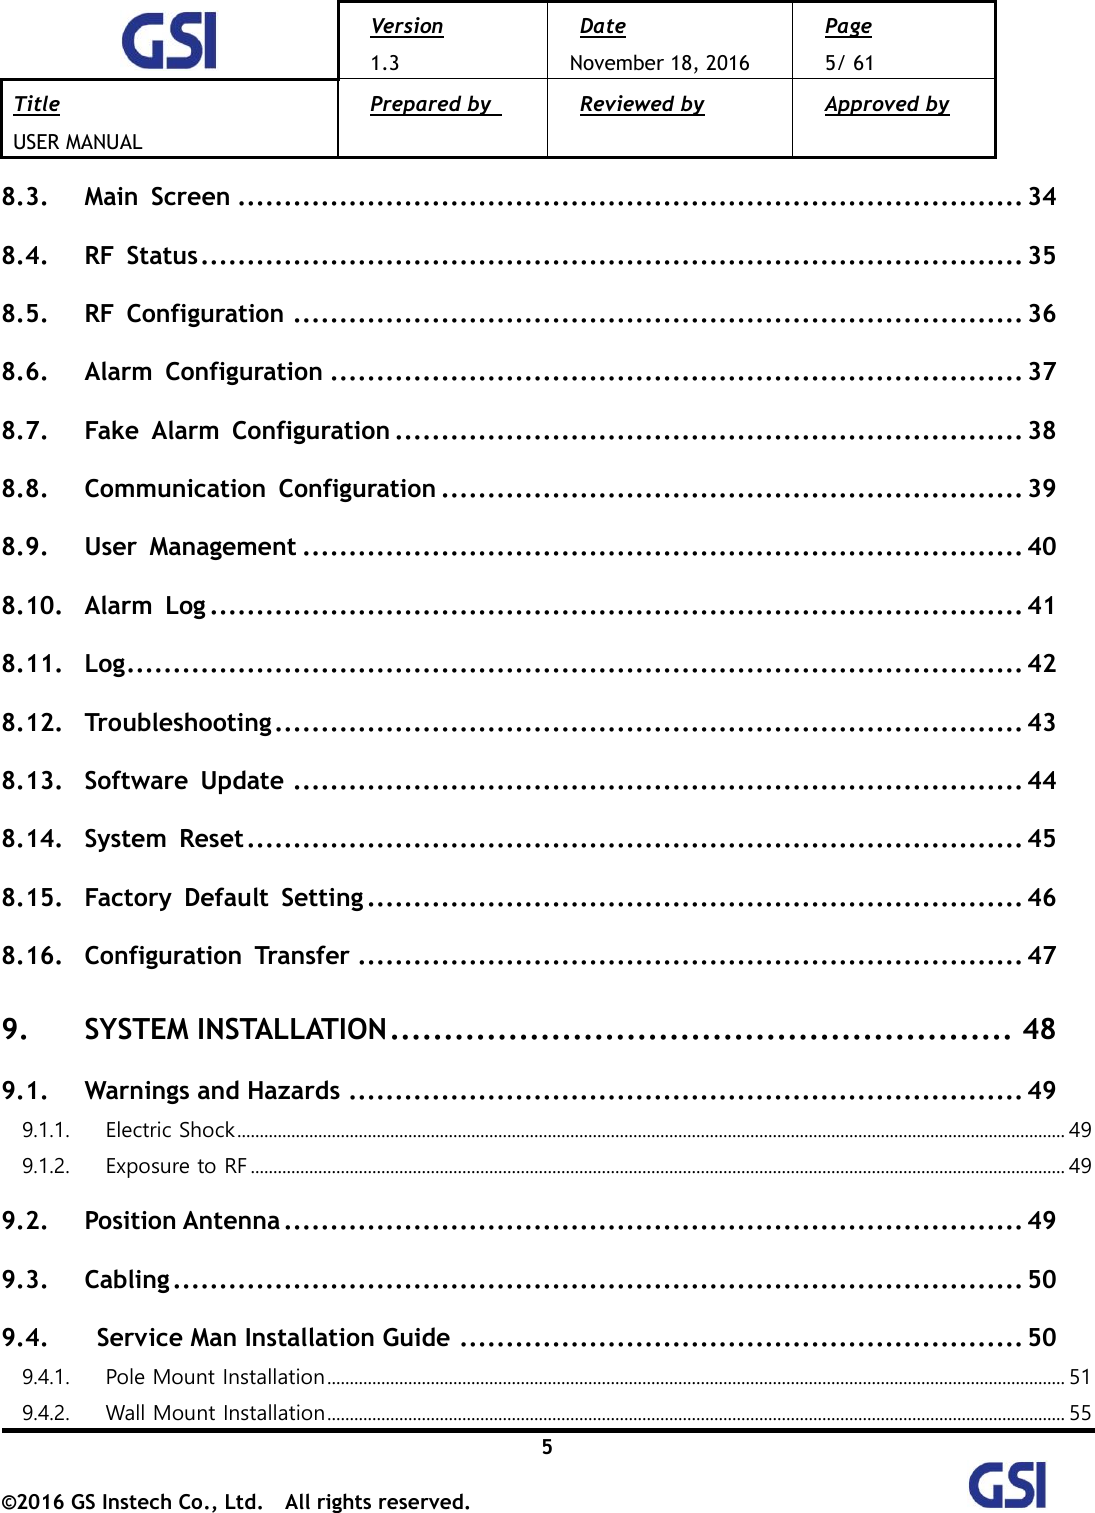  Version 1.3 Date November 18, 2016 Page 5/ 61 Title USER MANUAL Prepared by   Reviewed by  Approved by   5 ©2016 GS Instech Co., Ltd.  All rights reserved.   8.3. Main  Screen ..................................................................................... 34 8.4. RF  Status ......................................................................................... 35 8.5. RF  Configuration ............................................................................... 36 8.6. Alarm  Configuration ........................................................................... 37 8.7. Fake  Alarm  Configuration .................................................................... 38 8.8. Communication  Configuration ............................................................... 39 8.9. User  Management .............................................................................. 40 8.10. Alarm  Log ........................................................................................ 41 8.11. Log ................................................................................................. 42 8.12. Troubleshooting ................................................................................. 43 8.13. Software  Update ............................................................................... 44 8.14. System  Reset .................................................................................... 45 8.15. Factory  Default  Setting ....................................................................... 46 8.16. Configuration  Transfer ........................................................................ 47 9. SYSTEM INSTALLATION .......................................................... 48 9.1. Warnings and Hazards ......................................................................... 49 9.1.1.  Electric Shock ........................................................................................................................................................................................ 49 9.1.2.  Exposure to RF ..................................................................................................................................................................................... 49 9.2. Position Antenna ................................................................................ 49 9.3. Cabling ............................................................................................ 50 9.4.   Service Man Installation Guide ............................................................. 50 9.4.1.  Pole Mount Installation .................................................................................................................................................................... 51 9.4.2.  Wall Mount Installation .................................................................................................................................................................... 55 